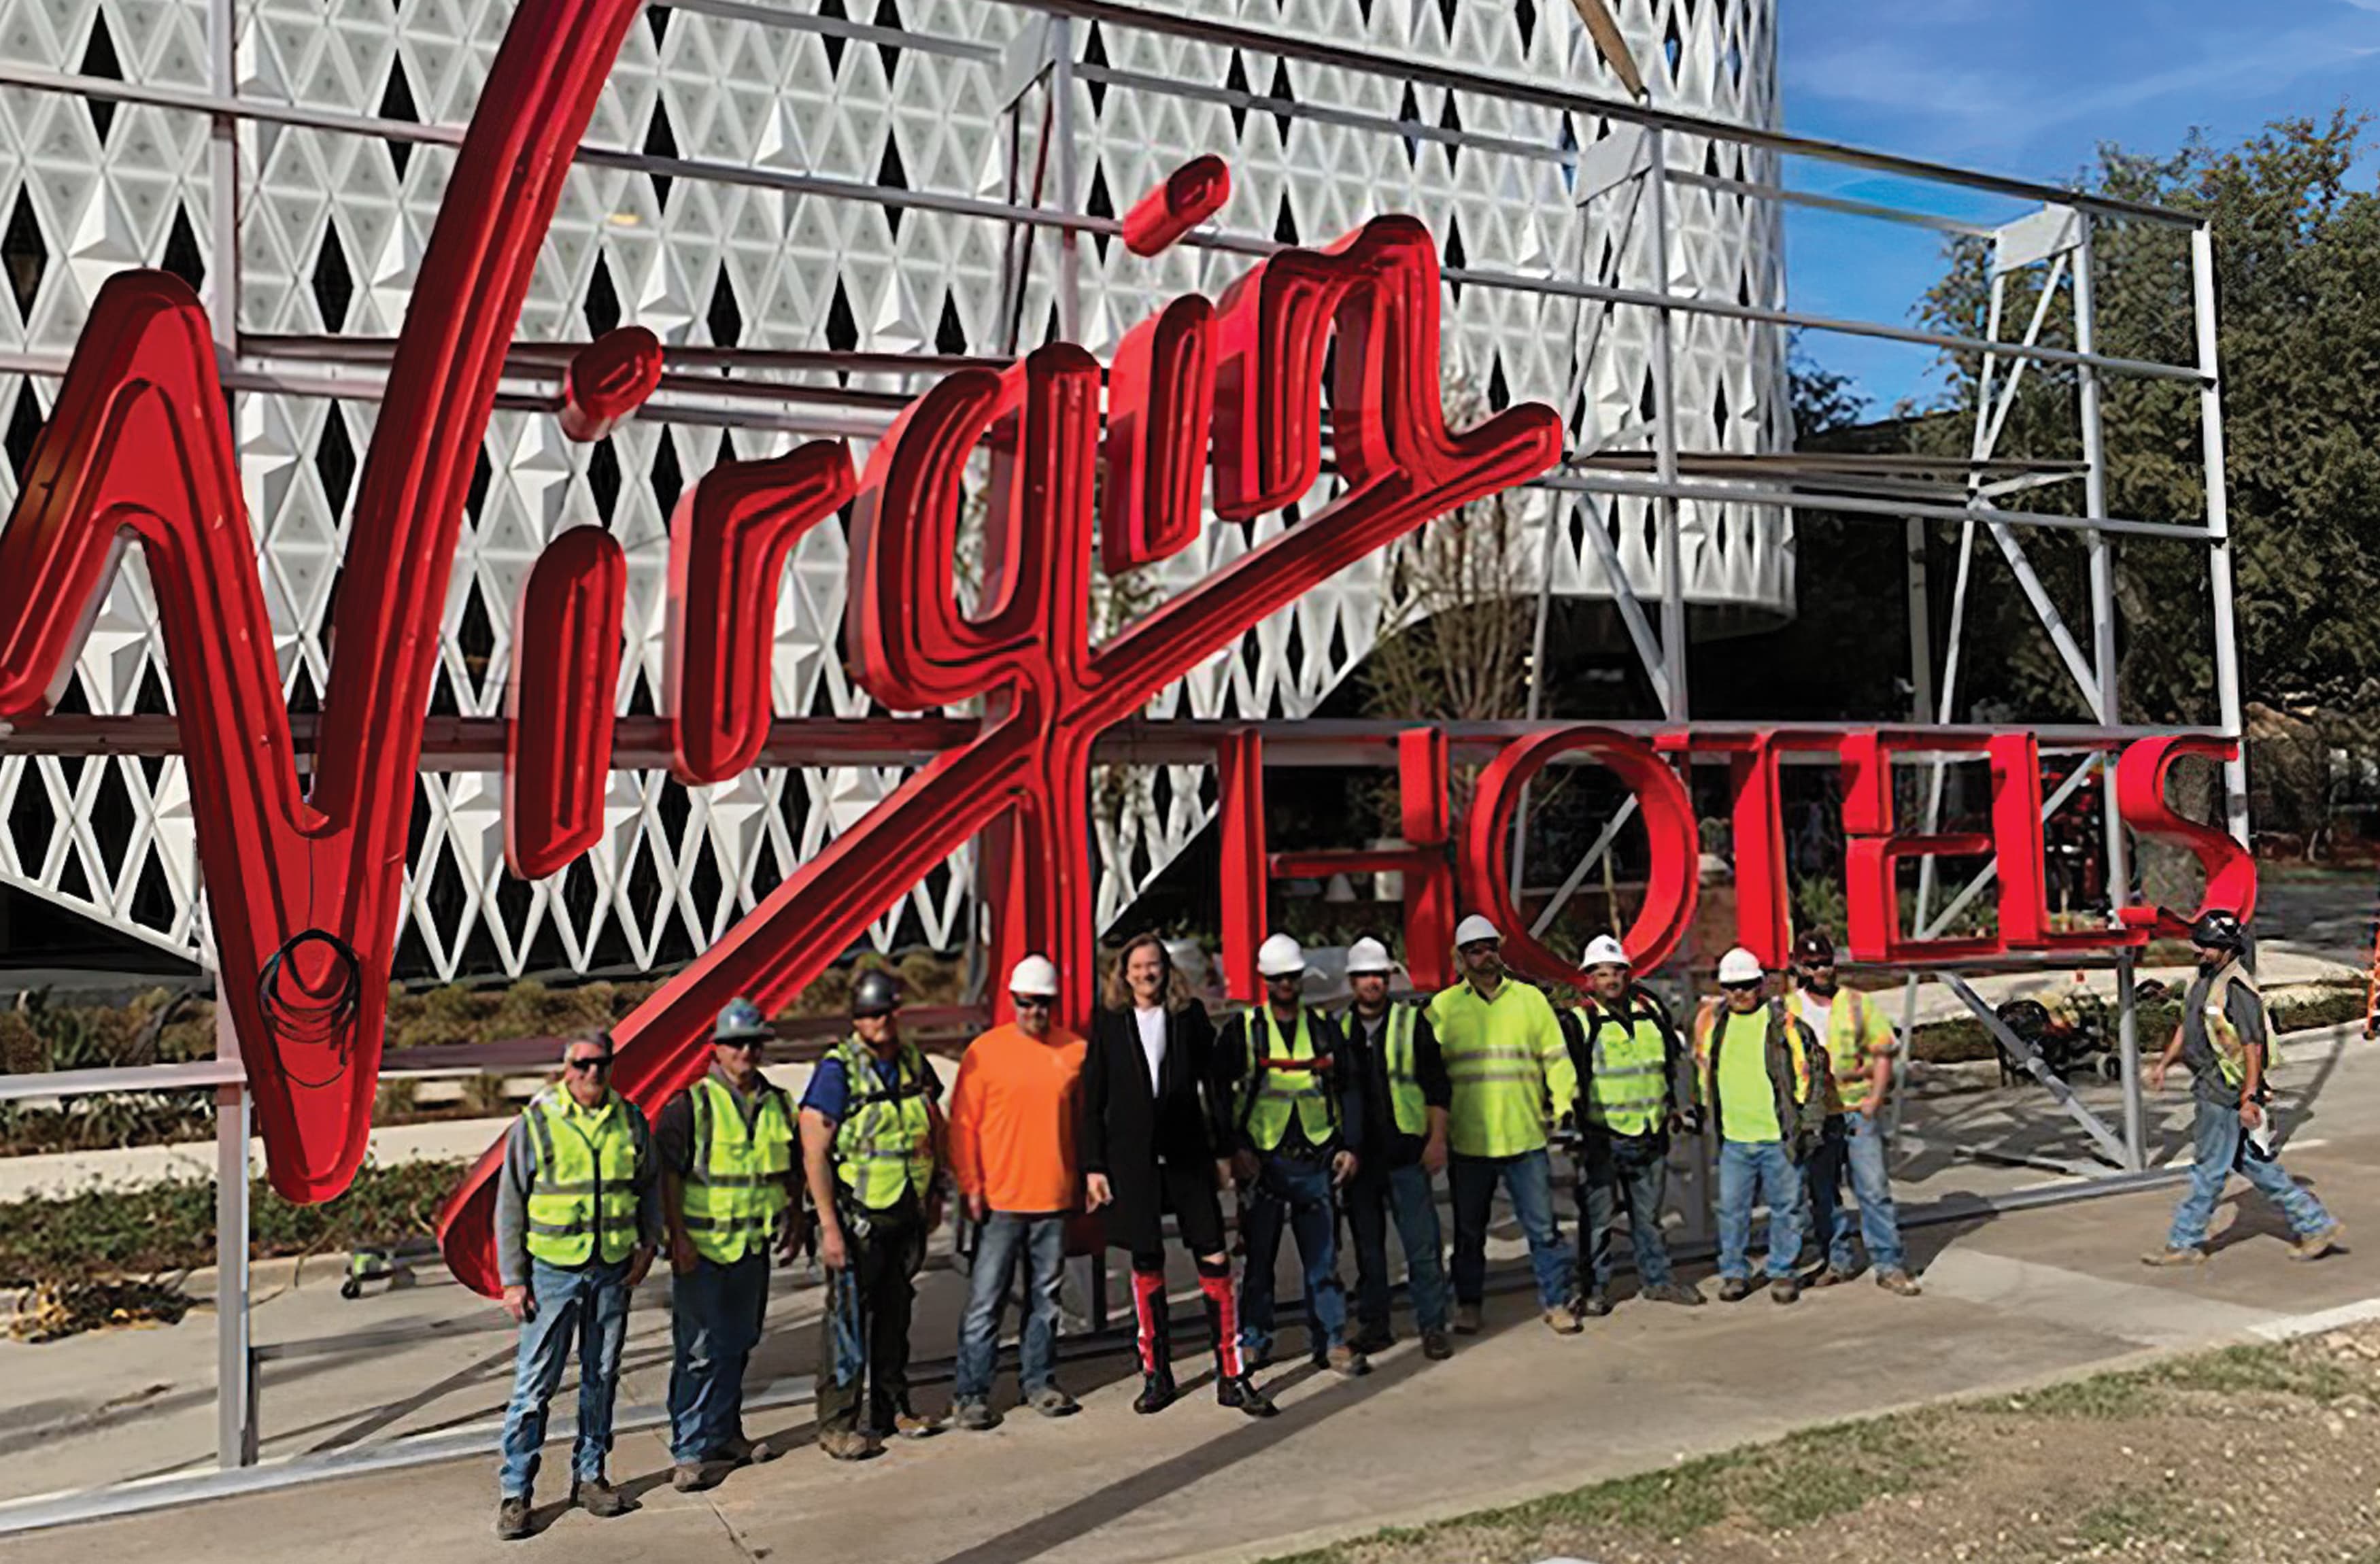 A photograph of a large fabricated sign for the new Virgin hotel featuring the installation team.